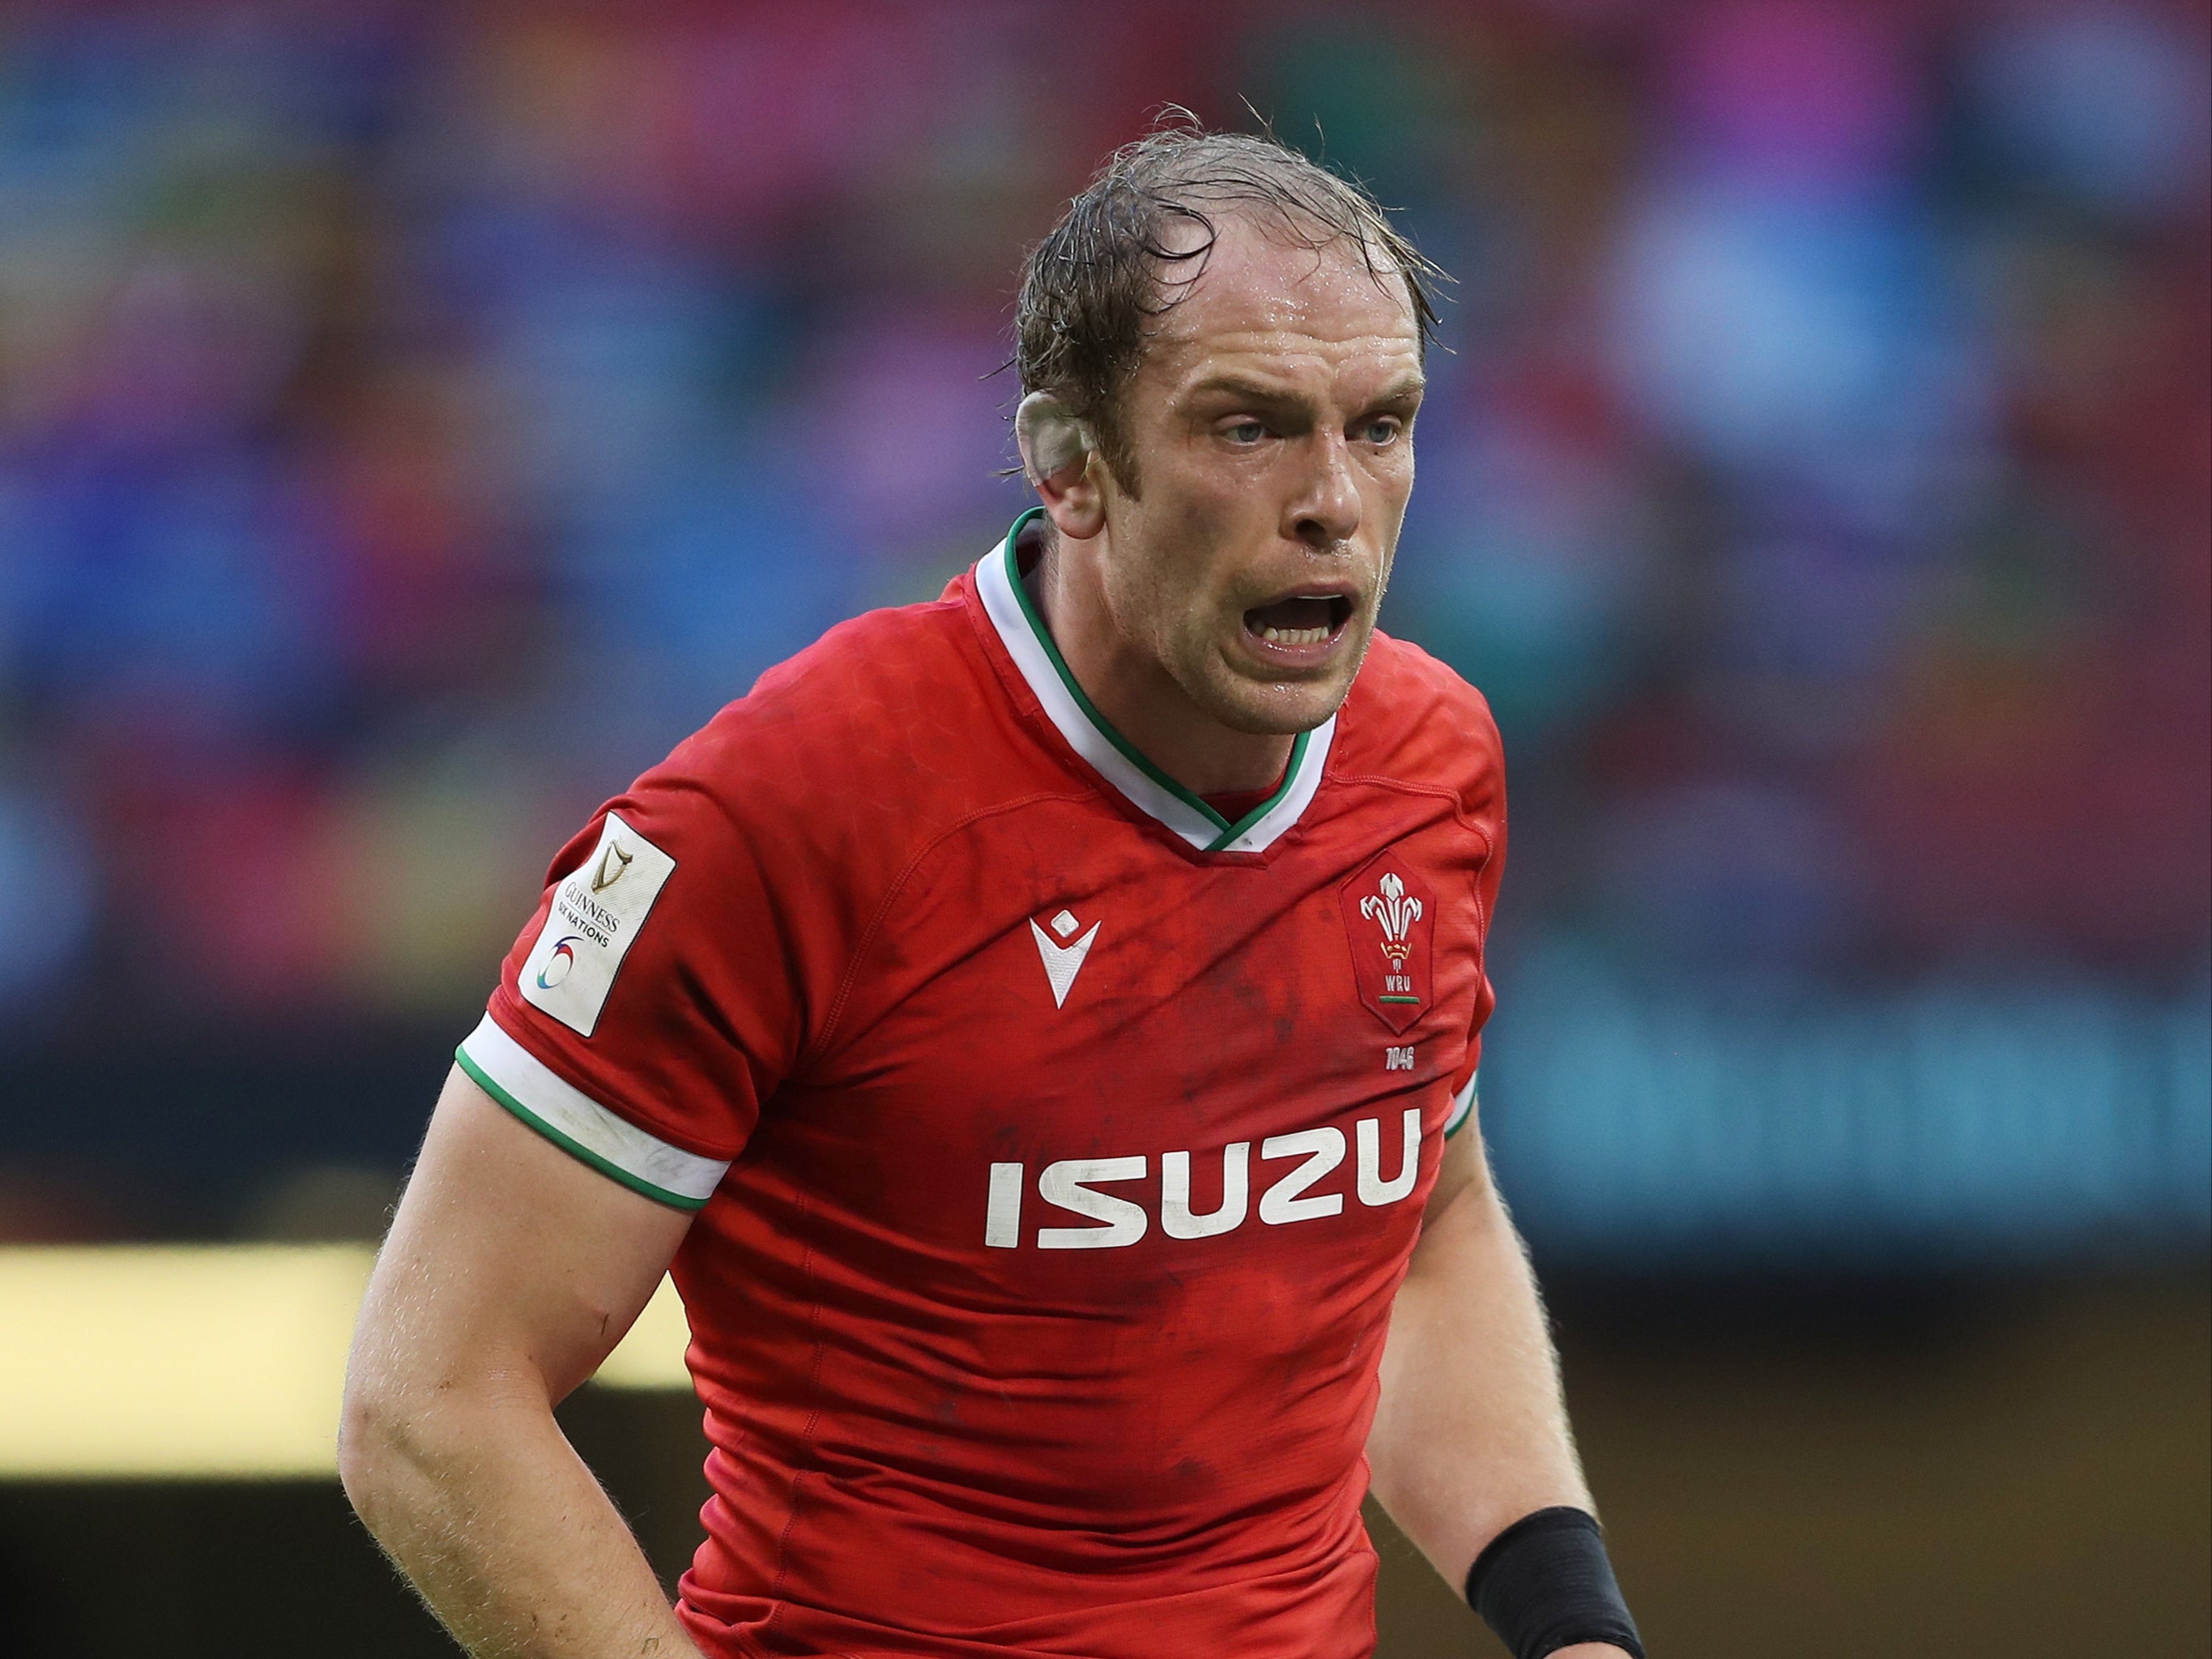 Alun Wyn Jones is continuing his recovery from a shoulder injury